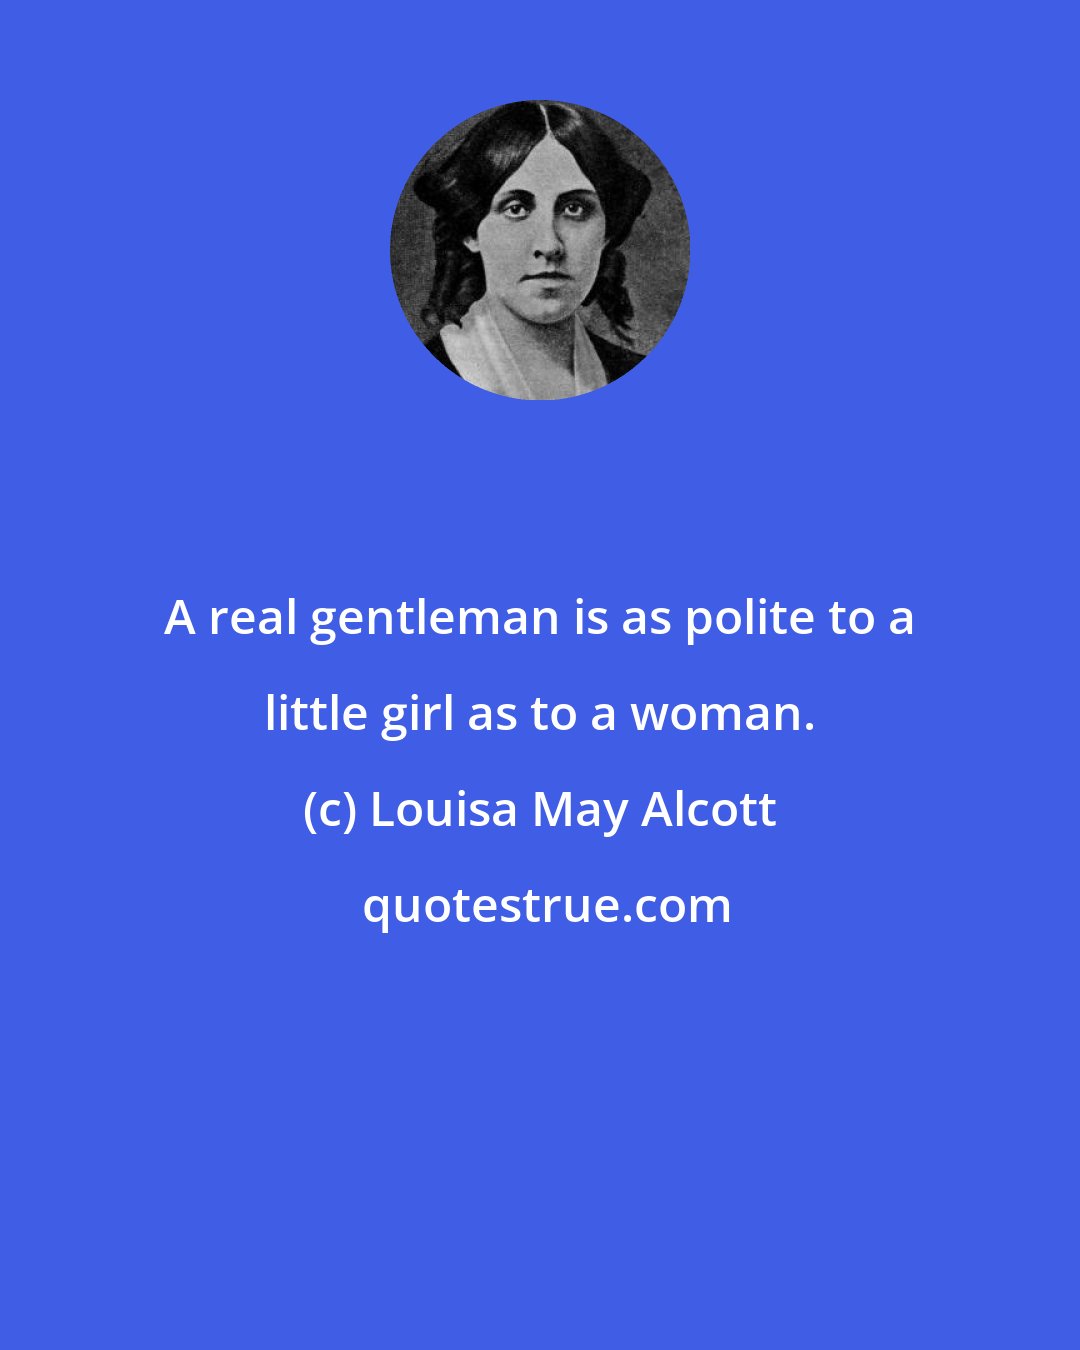 Louisa May Alcott: A real gentleman is as polite to a little girl as to a woman.